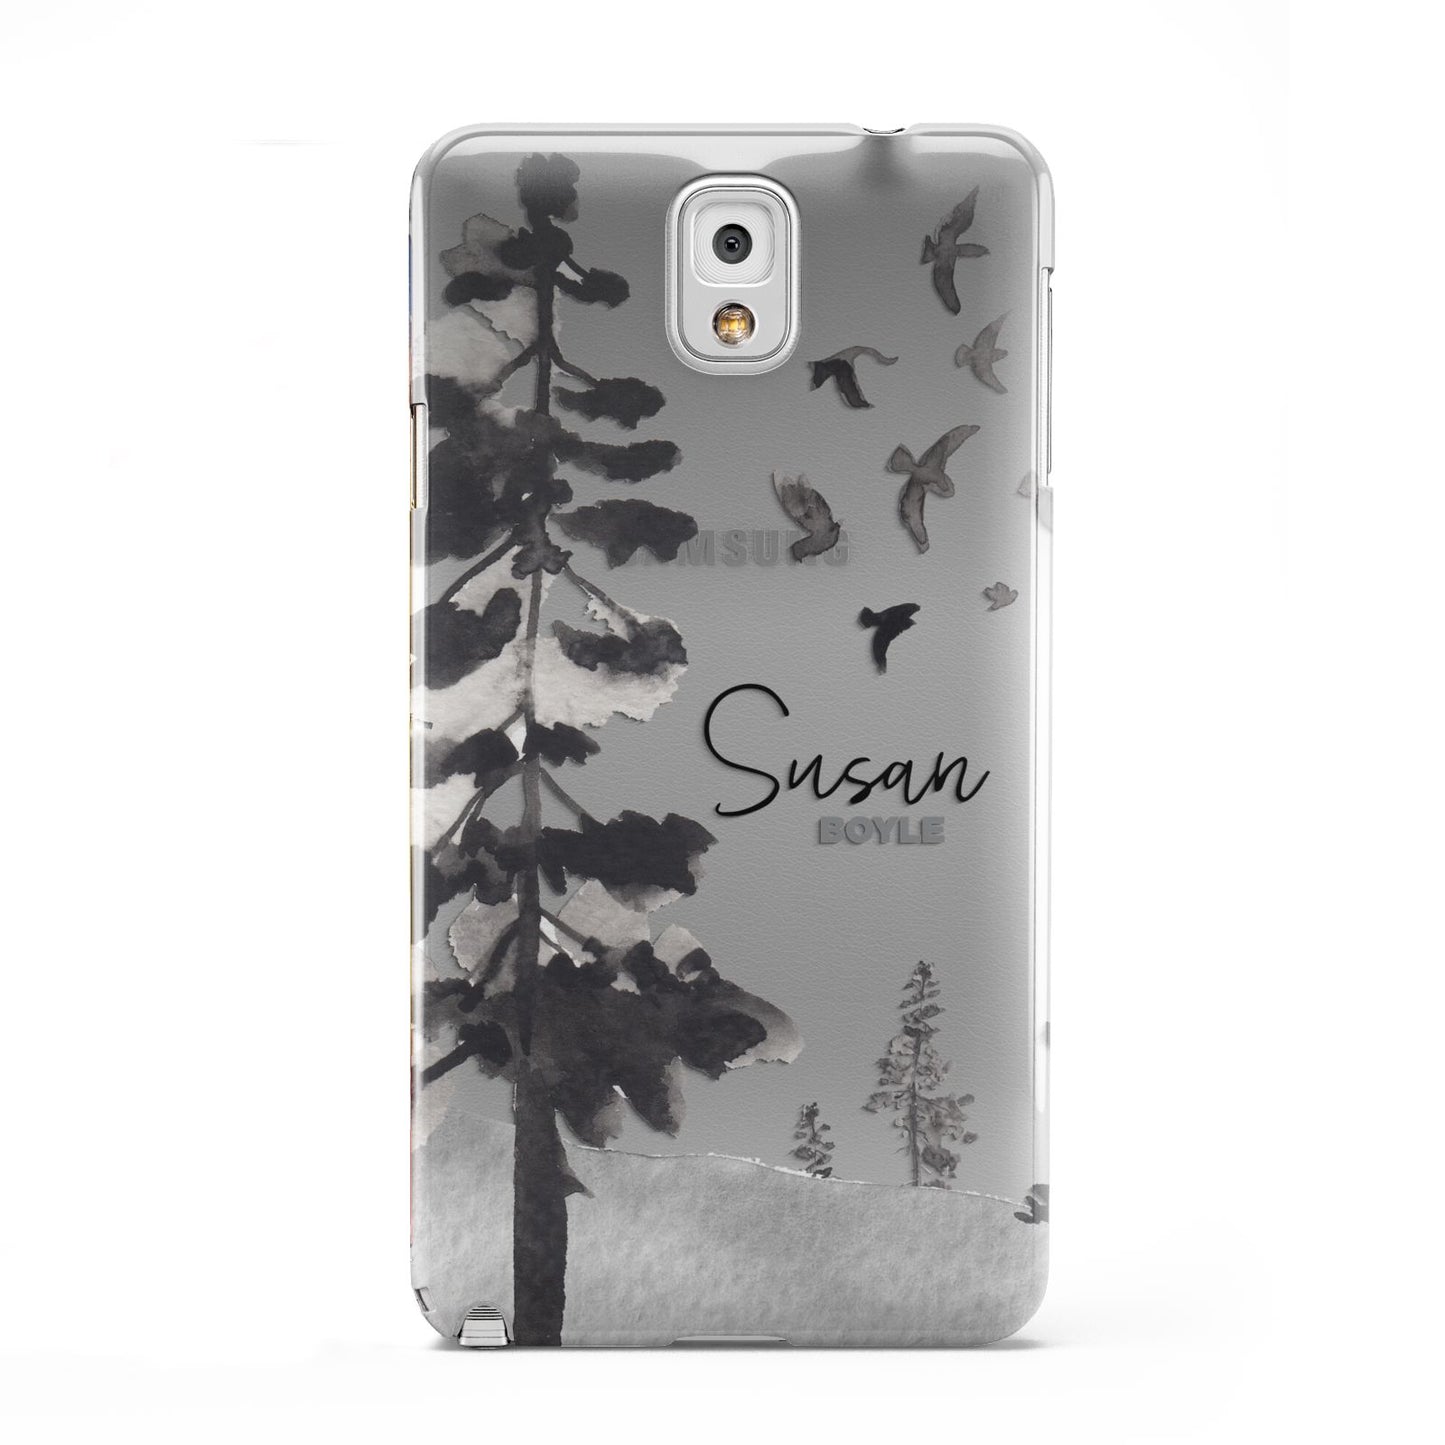 Personalised Monochrome Forest Samsung Galaxy Note 3 Case